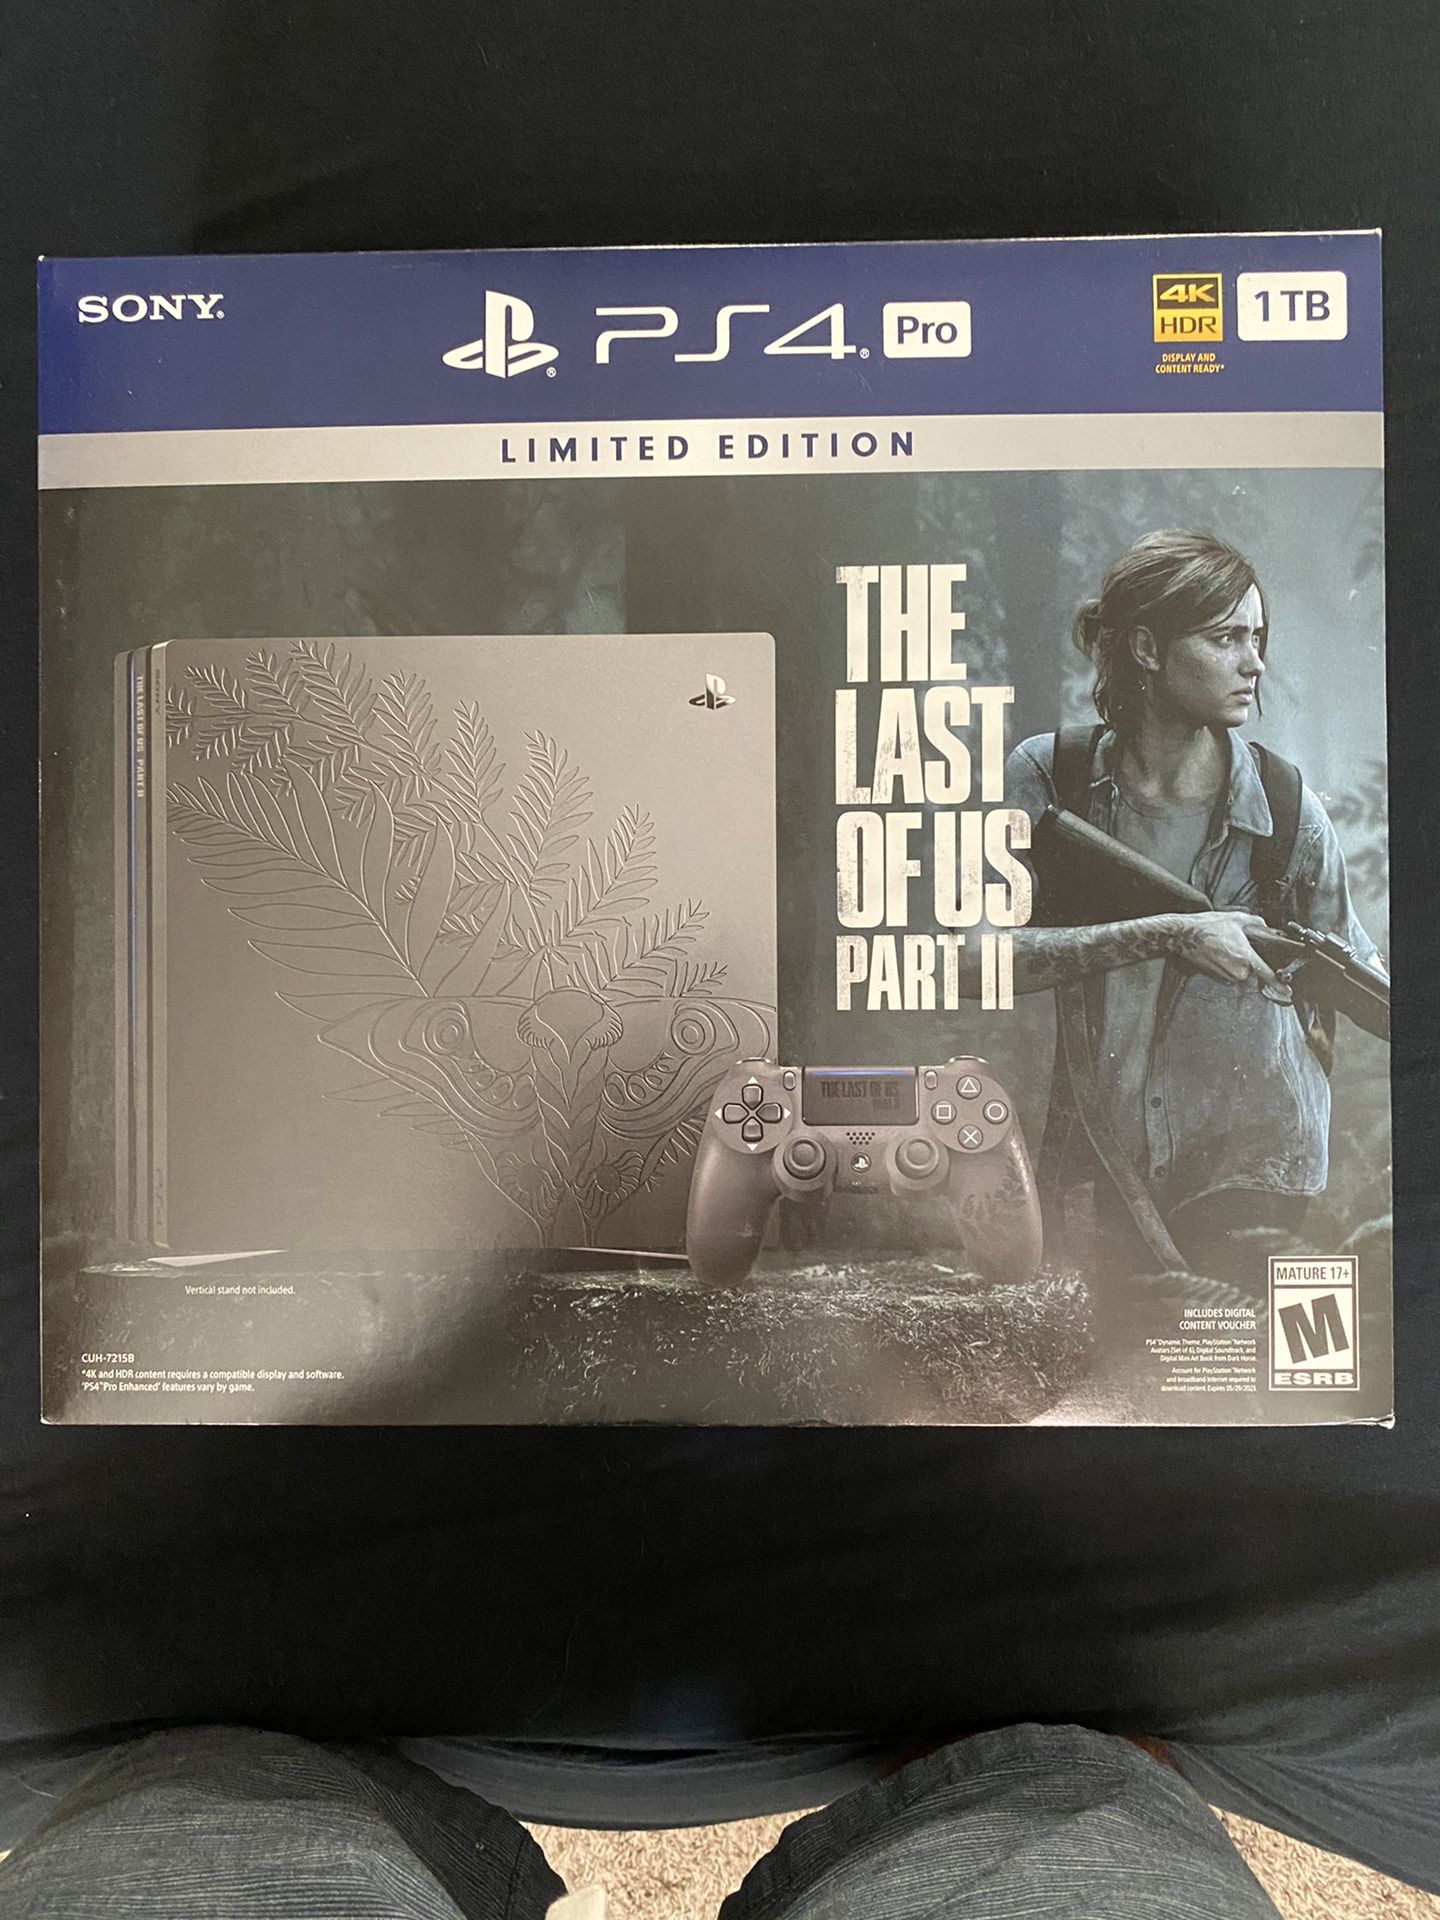 New The last of us 2 PS4 pro. No game.